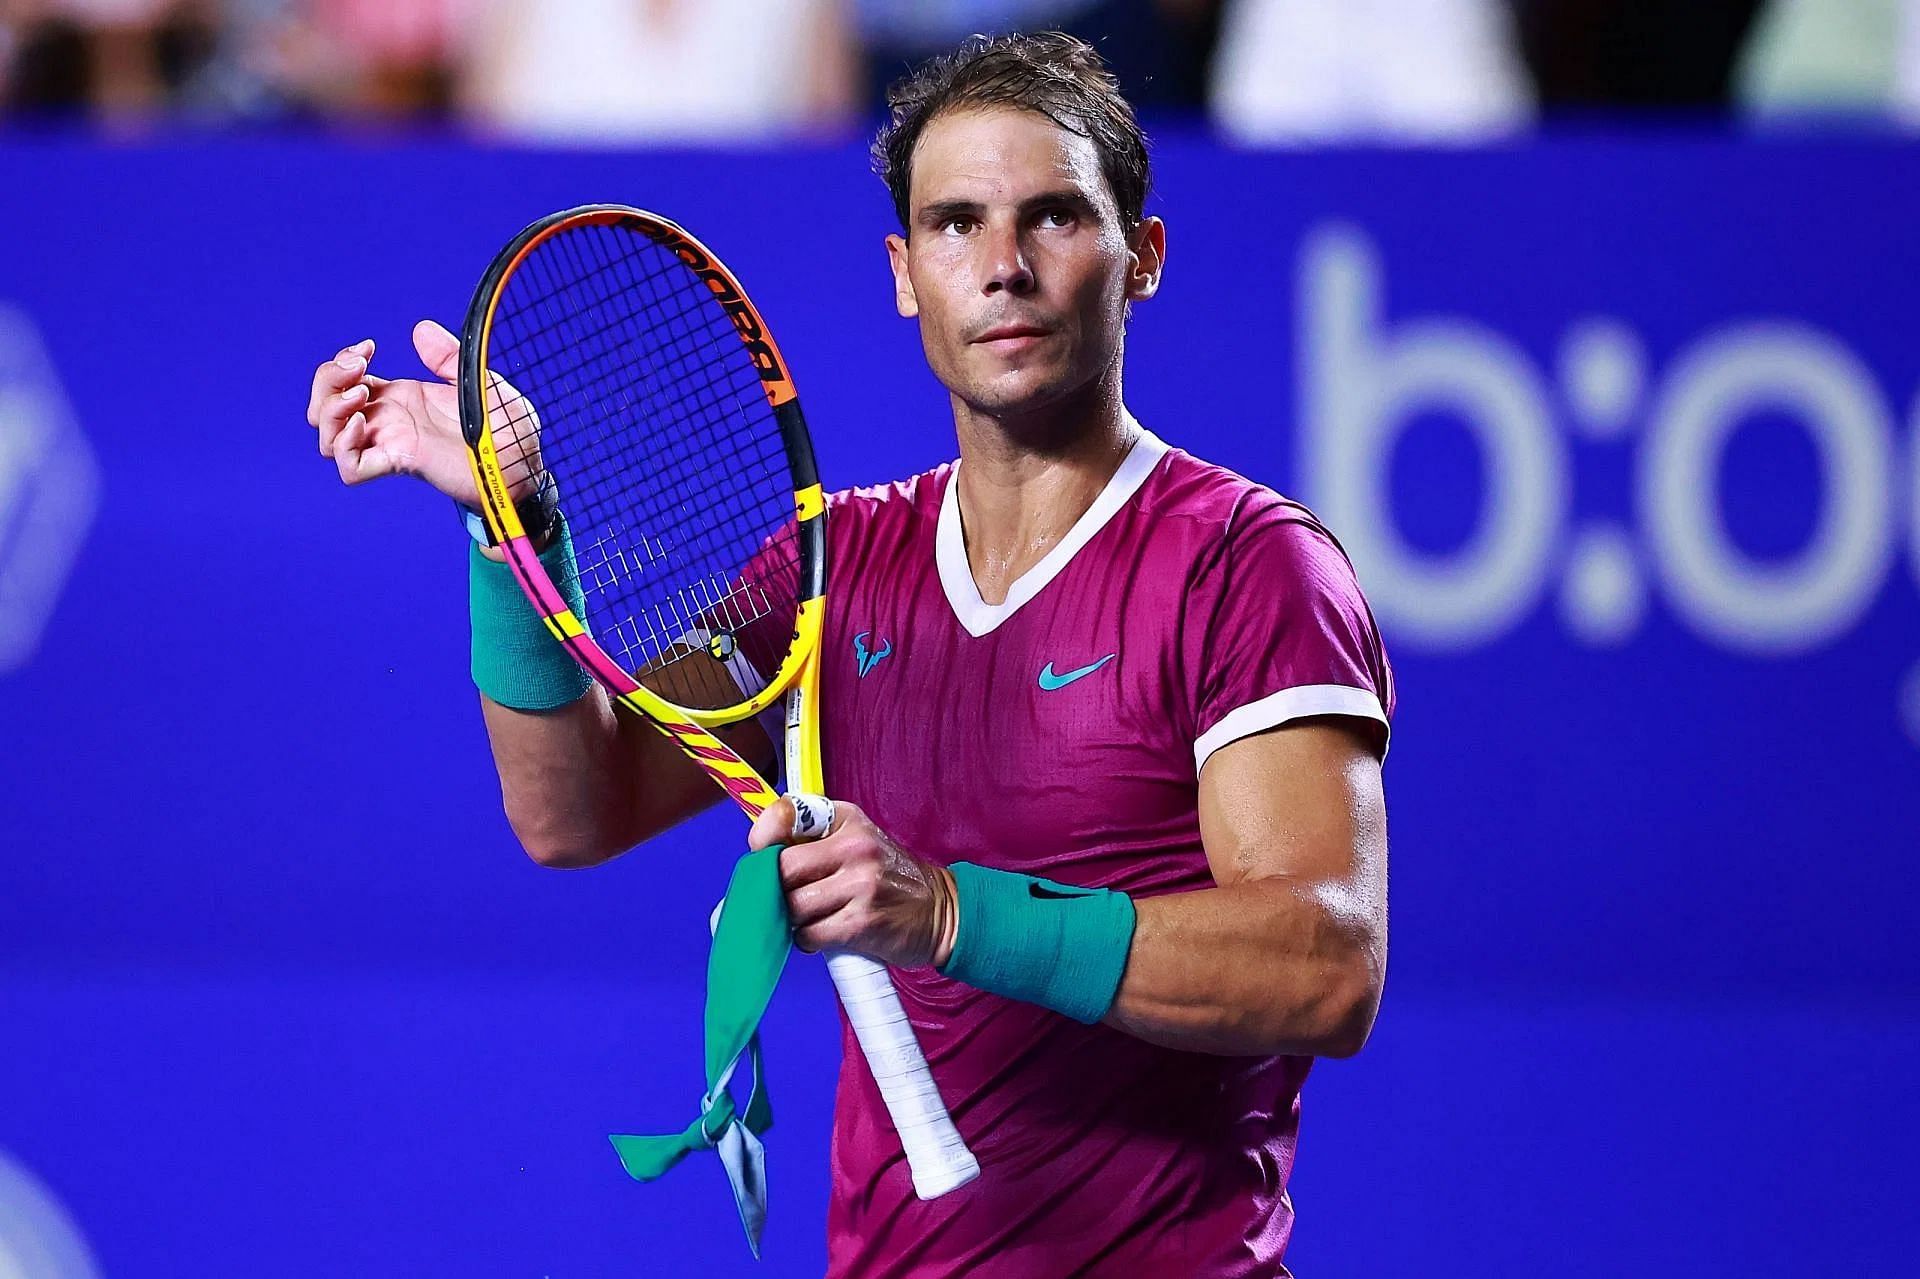 Rafael Nadal became the player with the most ATP 500 wins after his victory over Stefan Kozlov